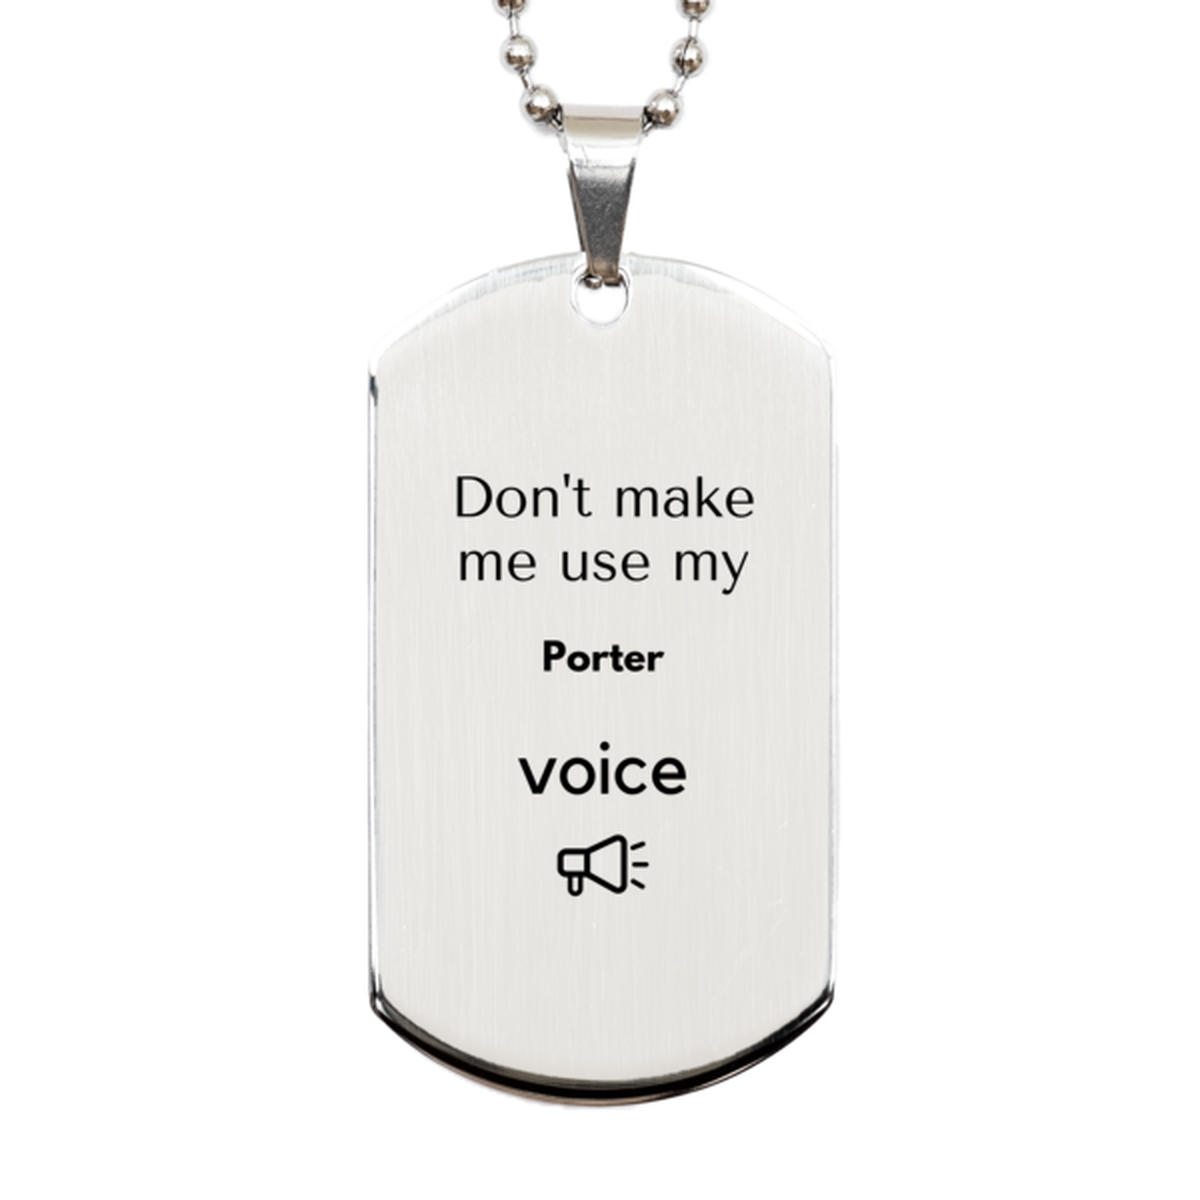 Don't make me use my Porter voice, Sarcasm Porter Gifts, Christmas Porter Silver Dog Tag Birthday Unique Gifts For Porter Coworkers, Men, Women, Colleague, Friends